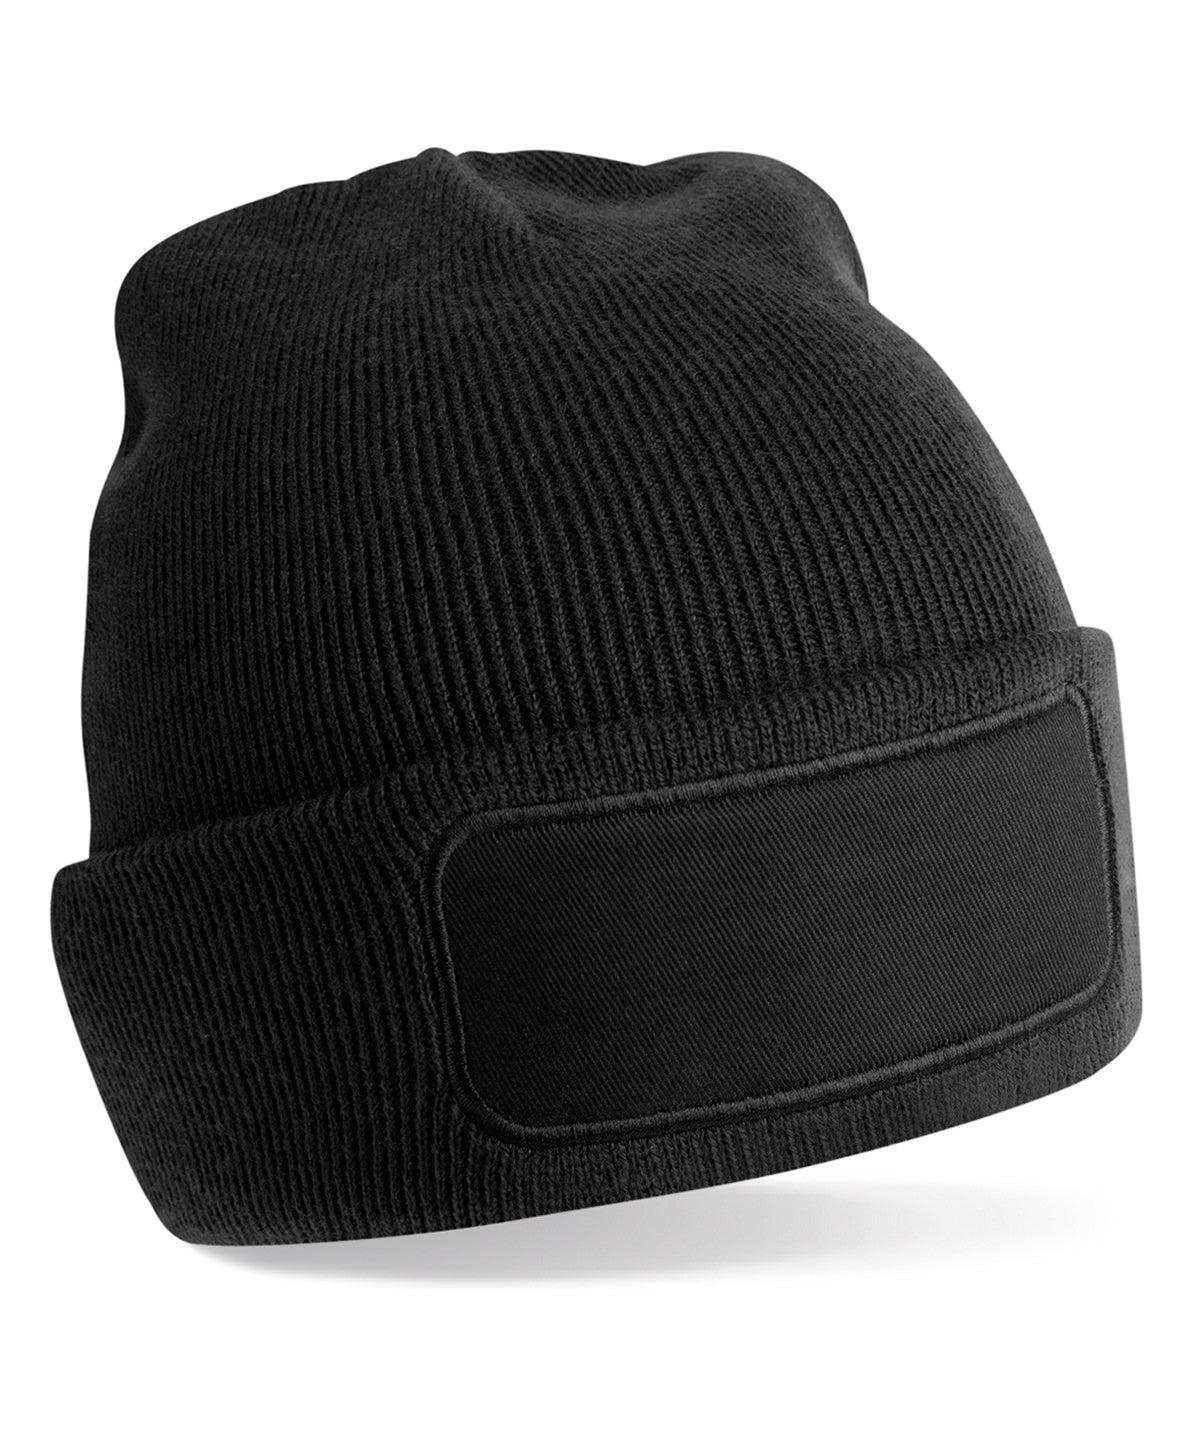 Personalised Hats - Black Beechfield Recycled original patch beanie